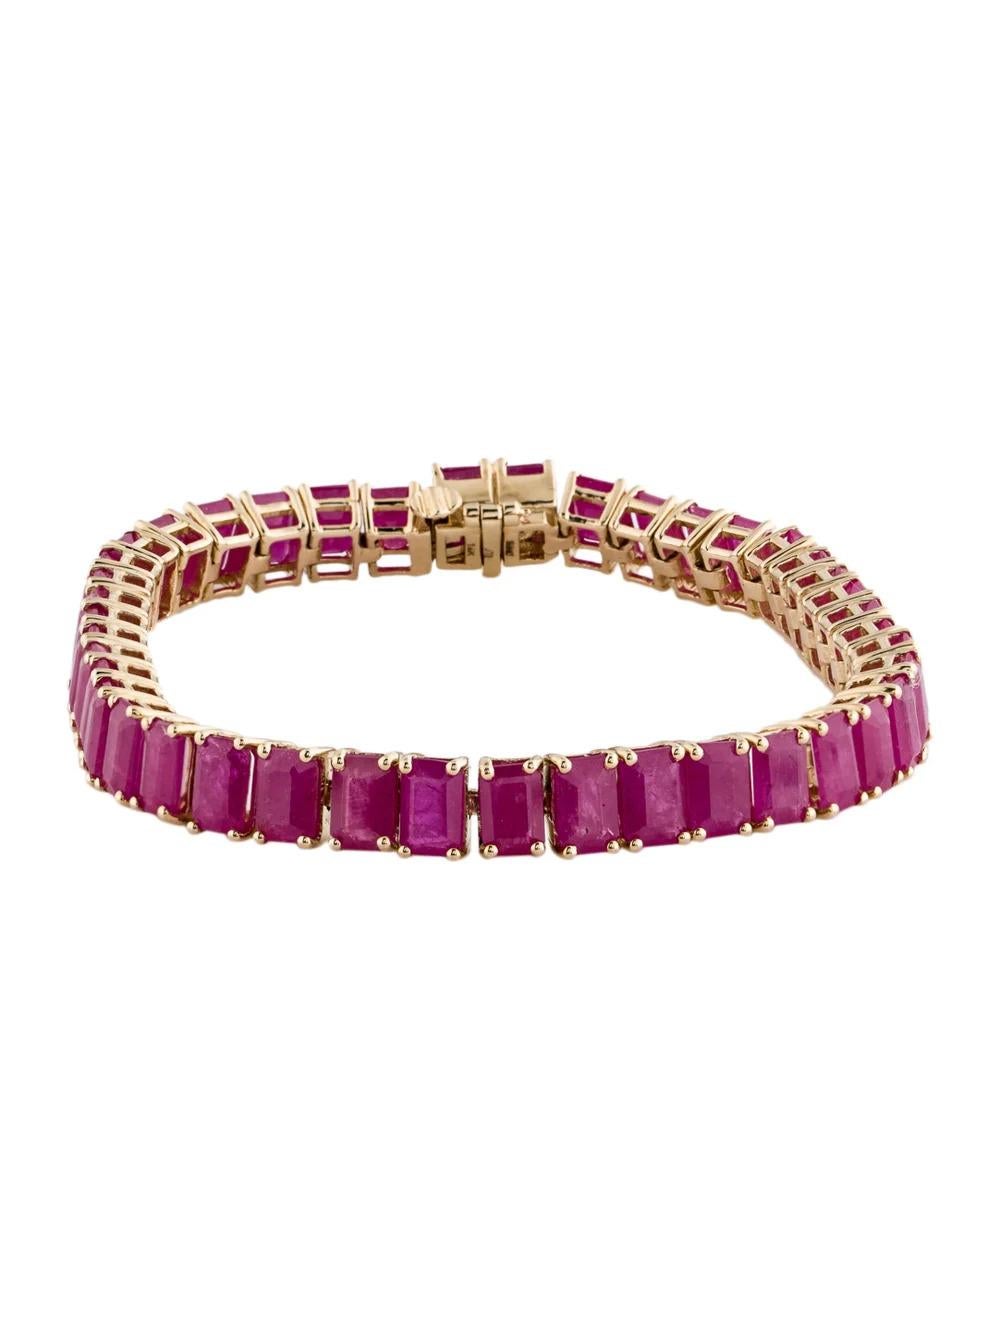 Enhance your jewelry collection with this exquisite 14K Yellow Gold Ruby Link Bracelet, showcasing a magnificent 30.20 carat Cut Cornered Rectangular Step Cut Ruby. Impeccably crafted, this bracelet exudes elegance and luxury, making it a timeless